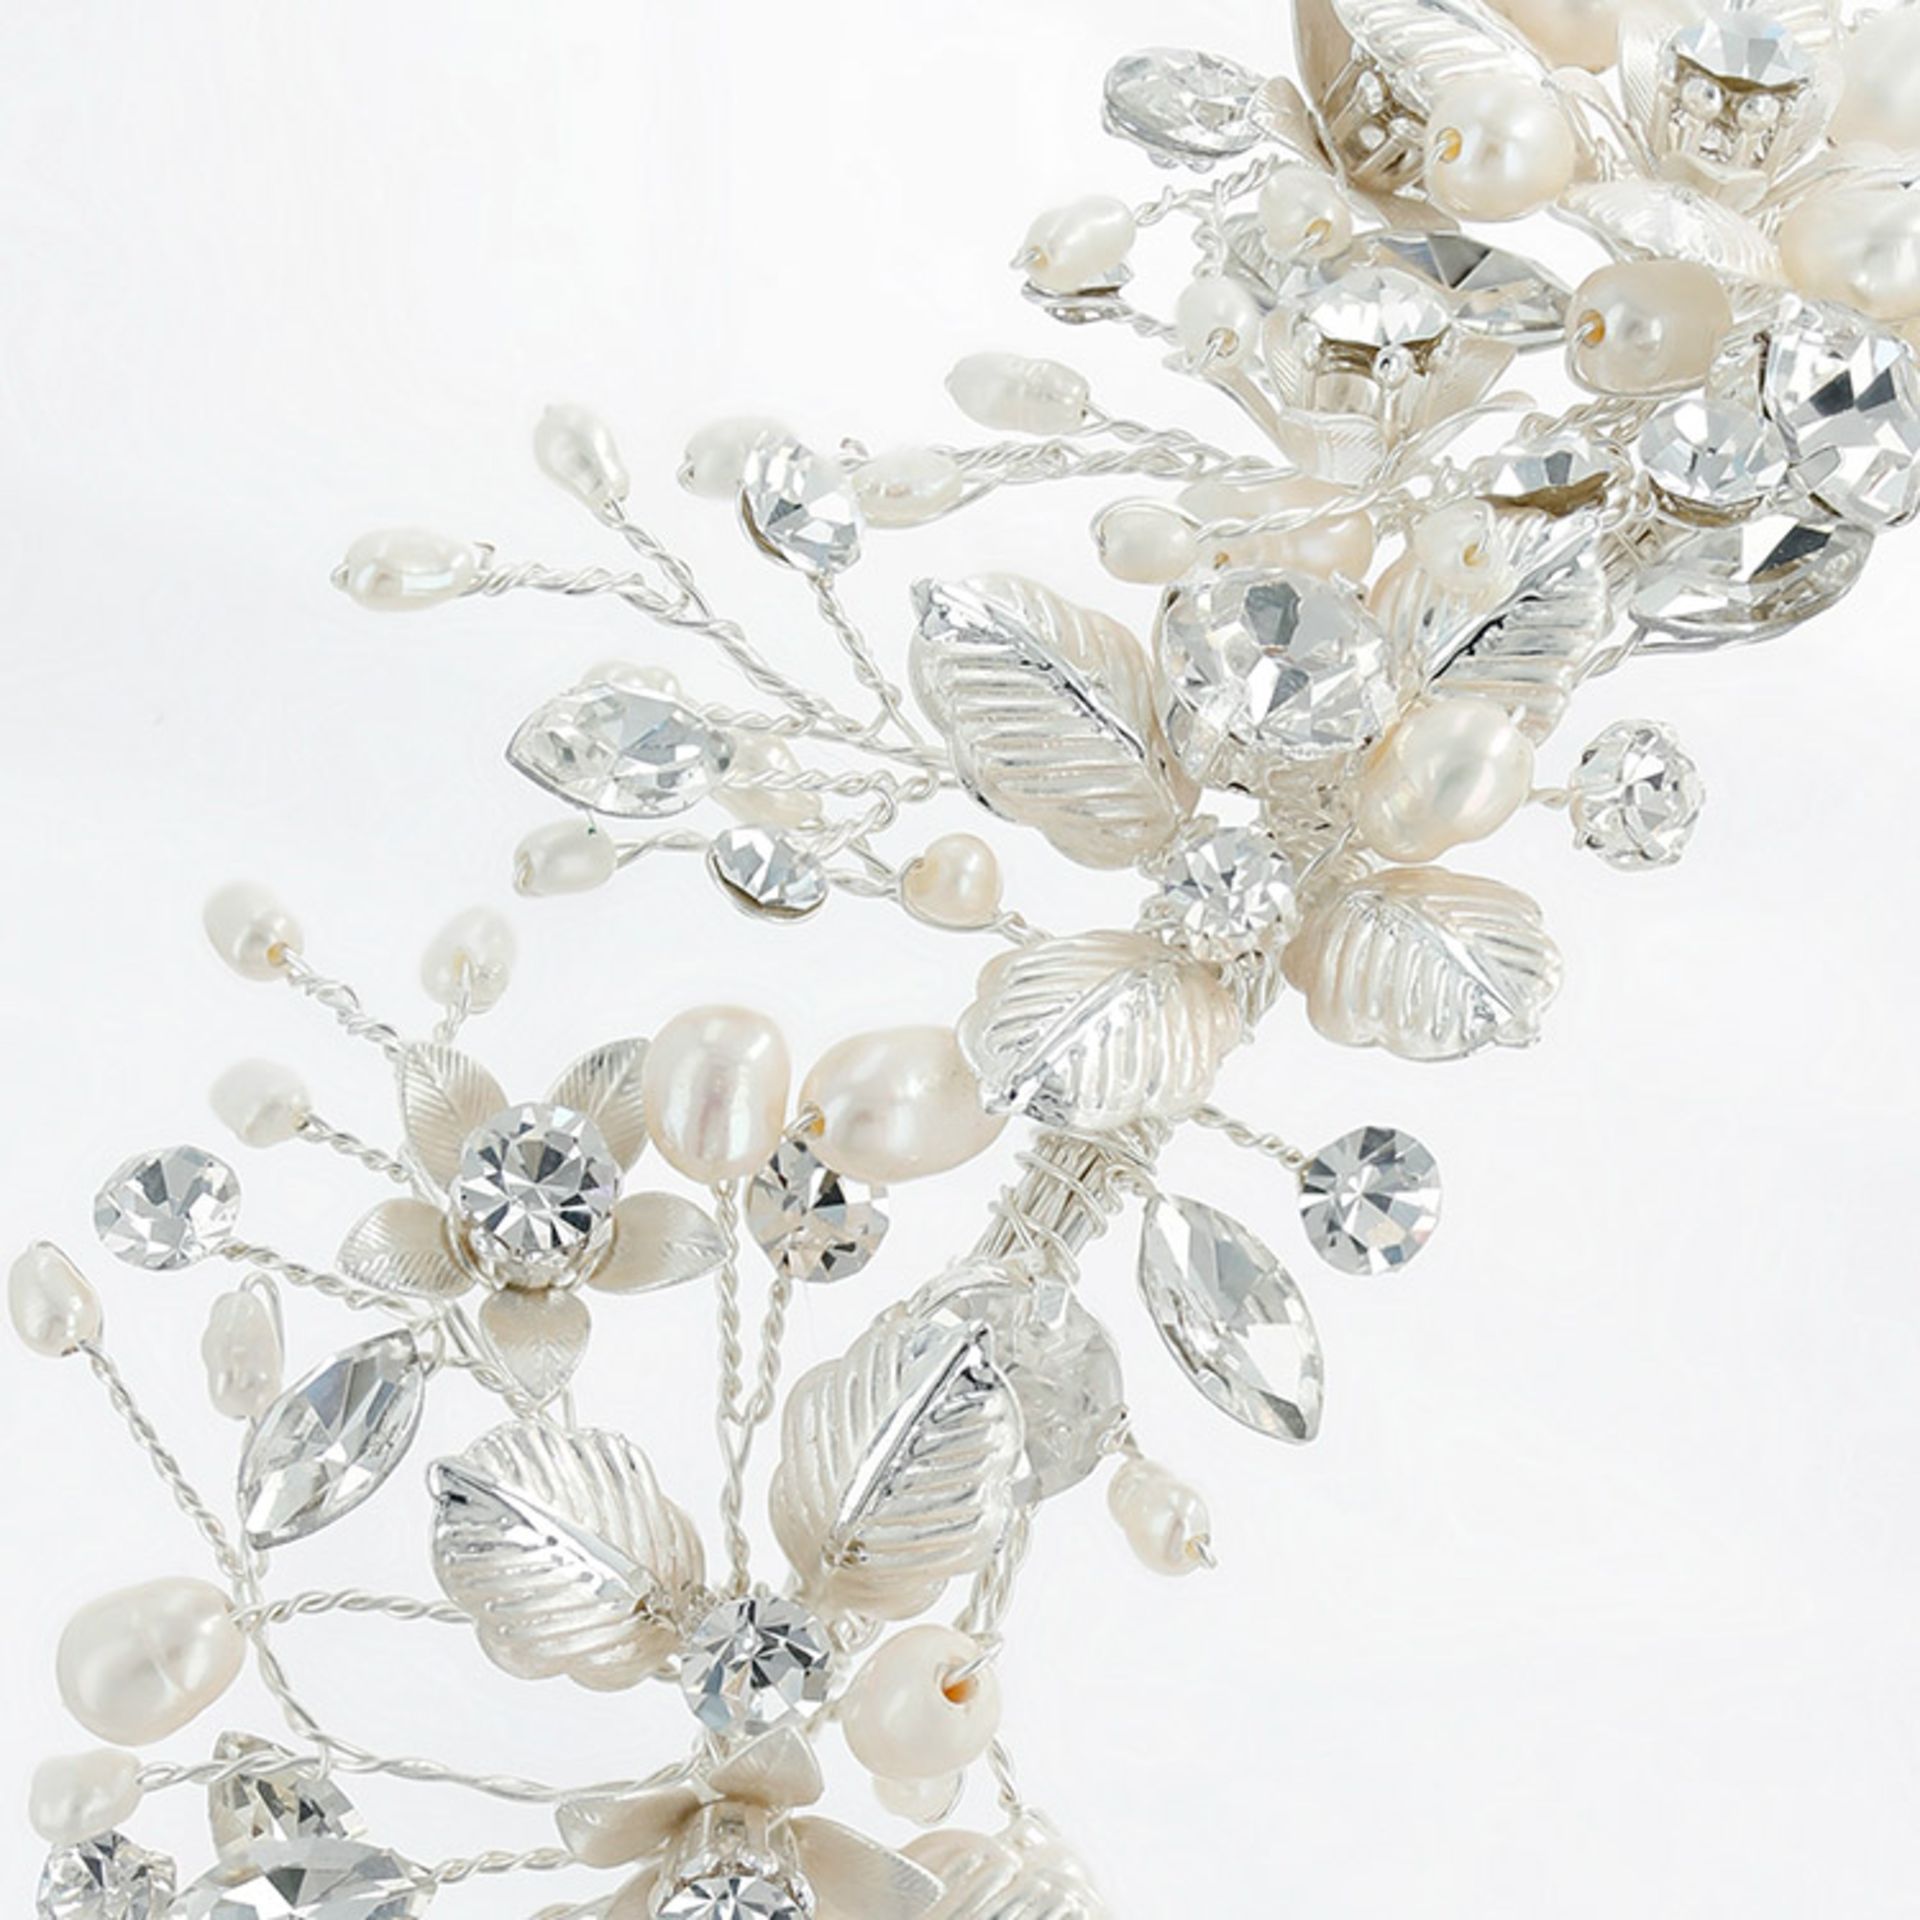 50+ Items of bridal accessories. Total Estimated RRP£3,000. See description.